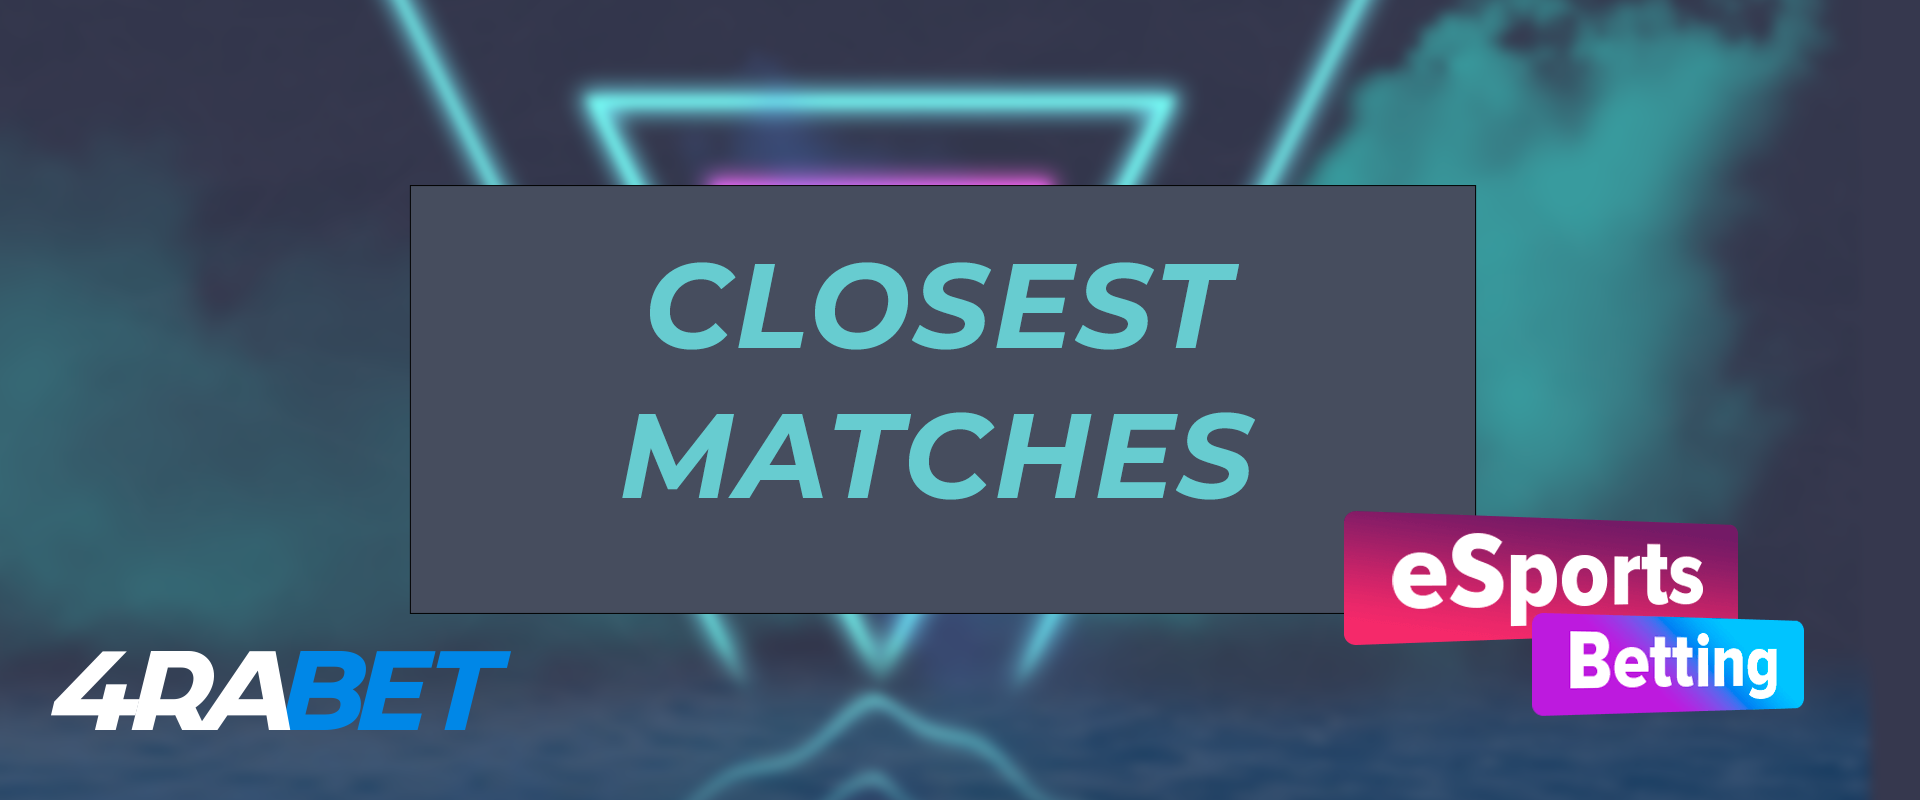 The closest matches on esport on the 4rabet.